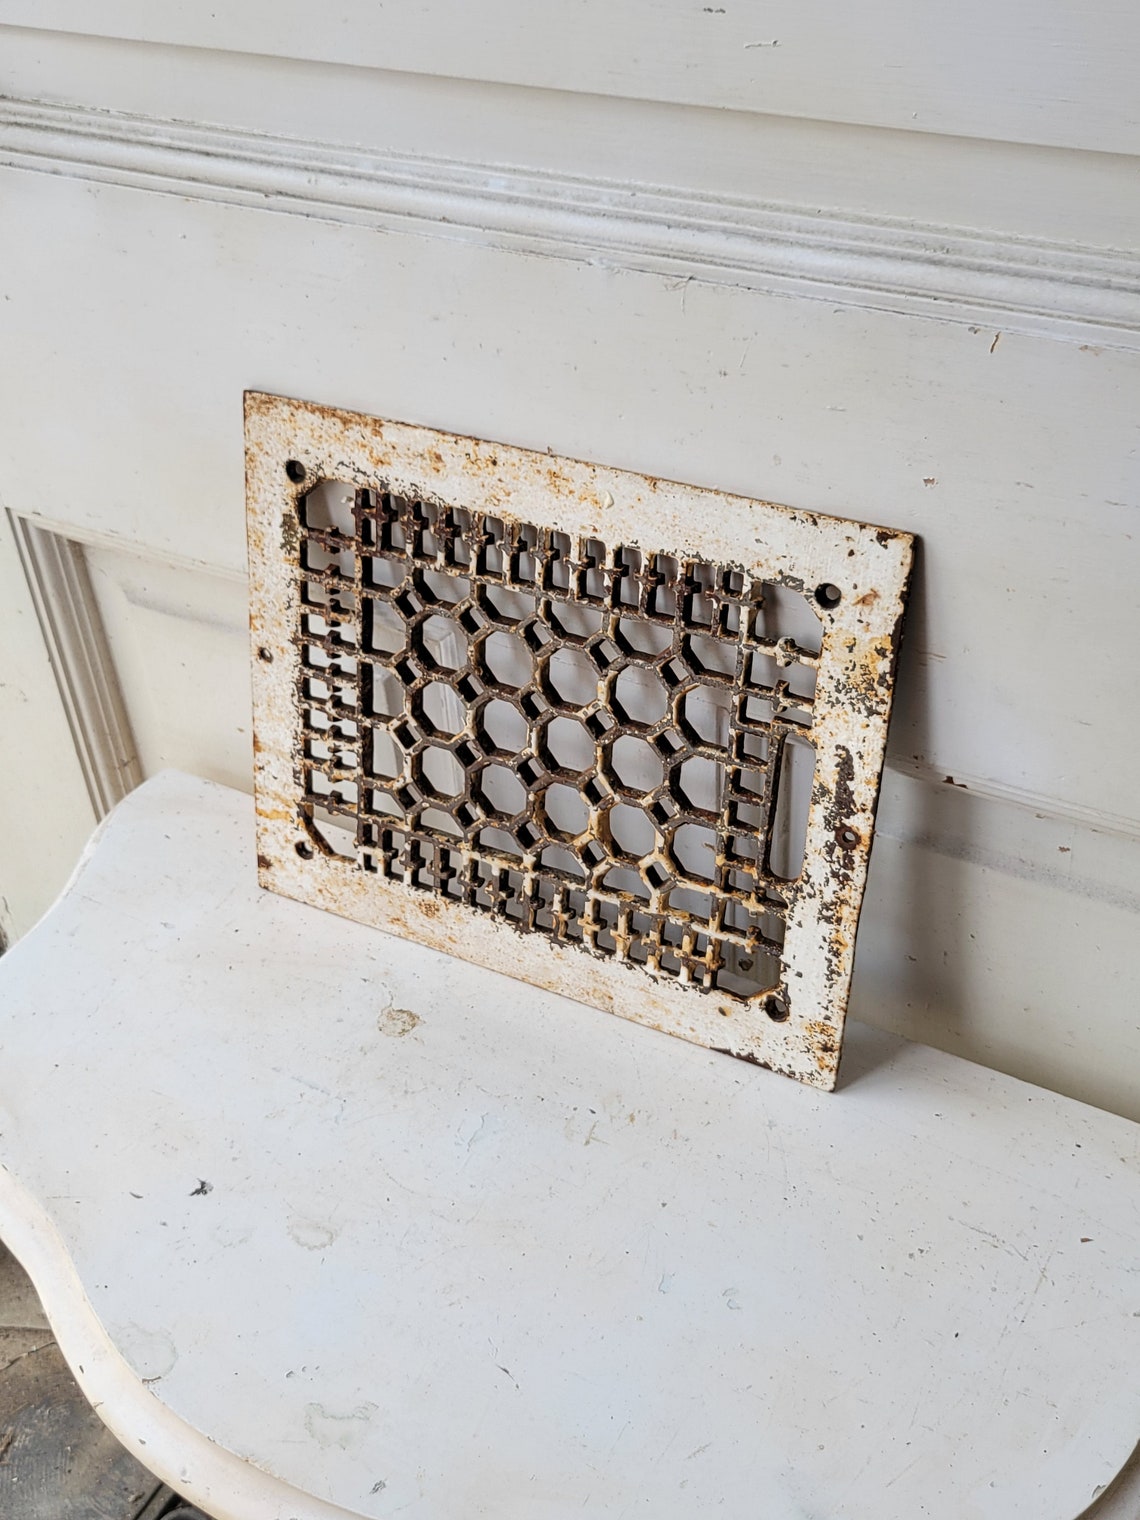 10 X 12 Ornate Vent Cover Cold Air Return Large Floor Vent Etsy